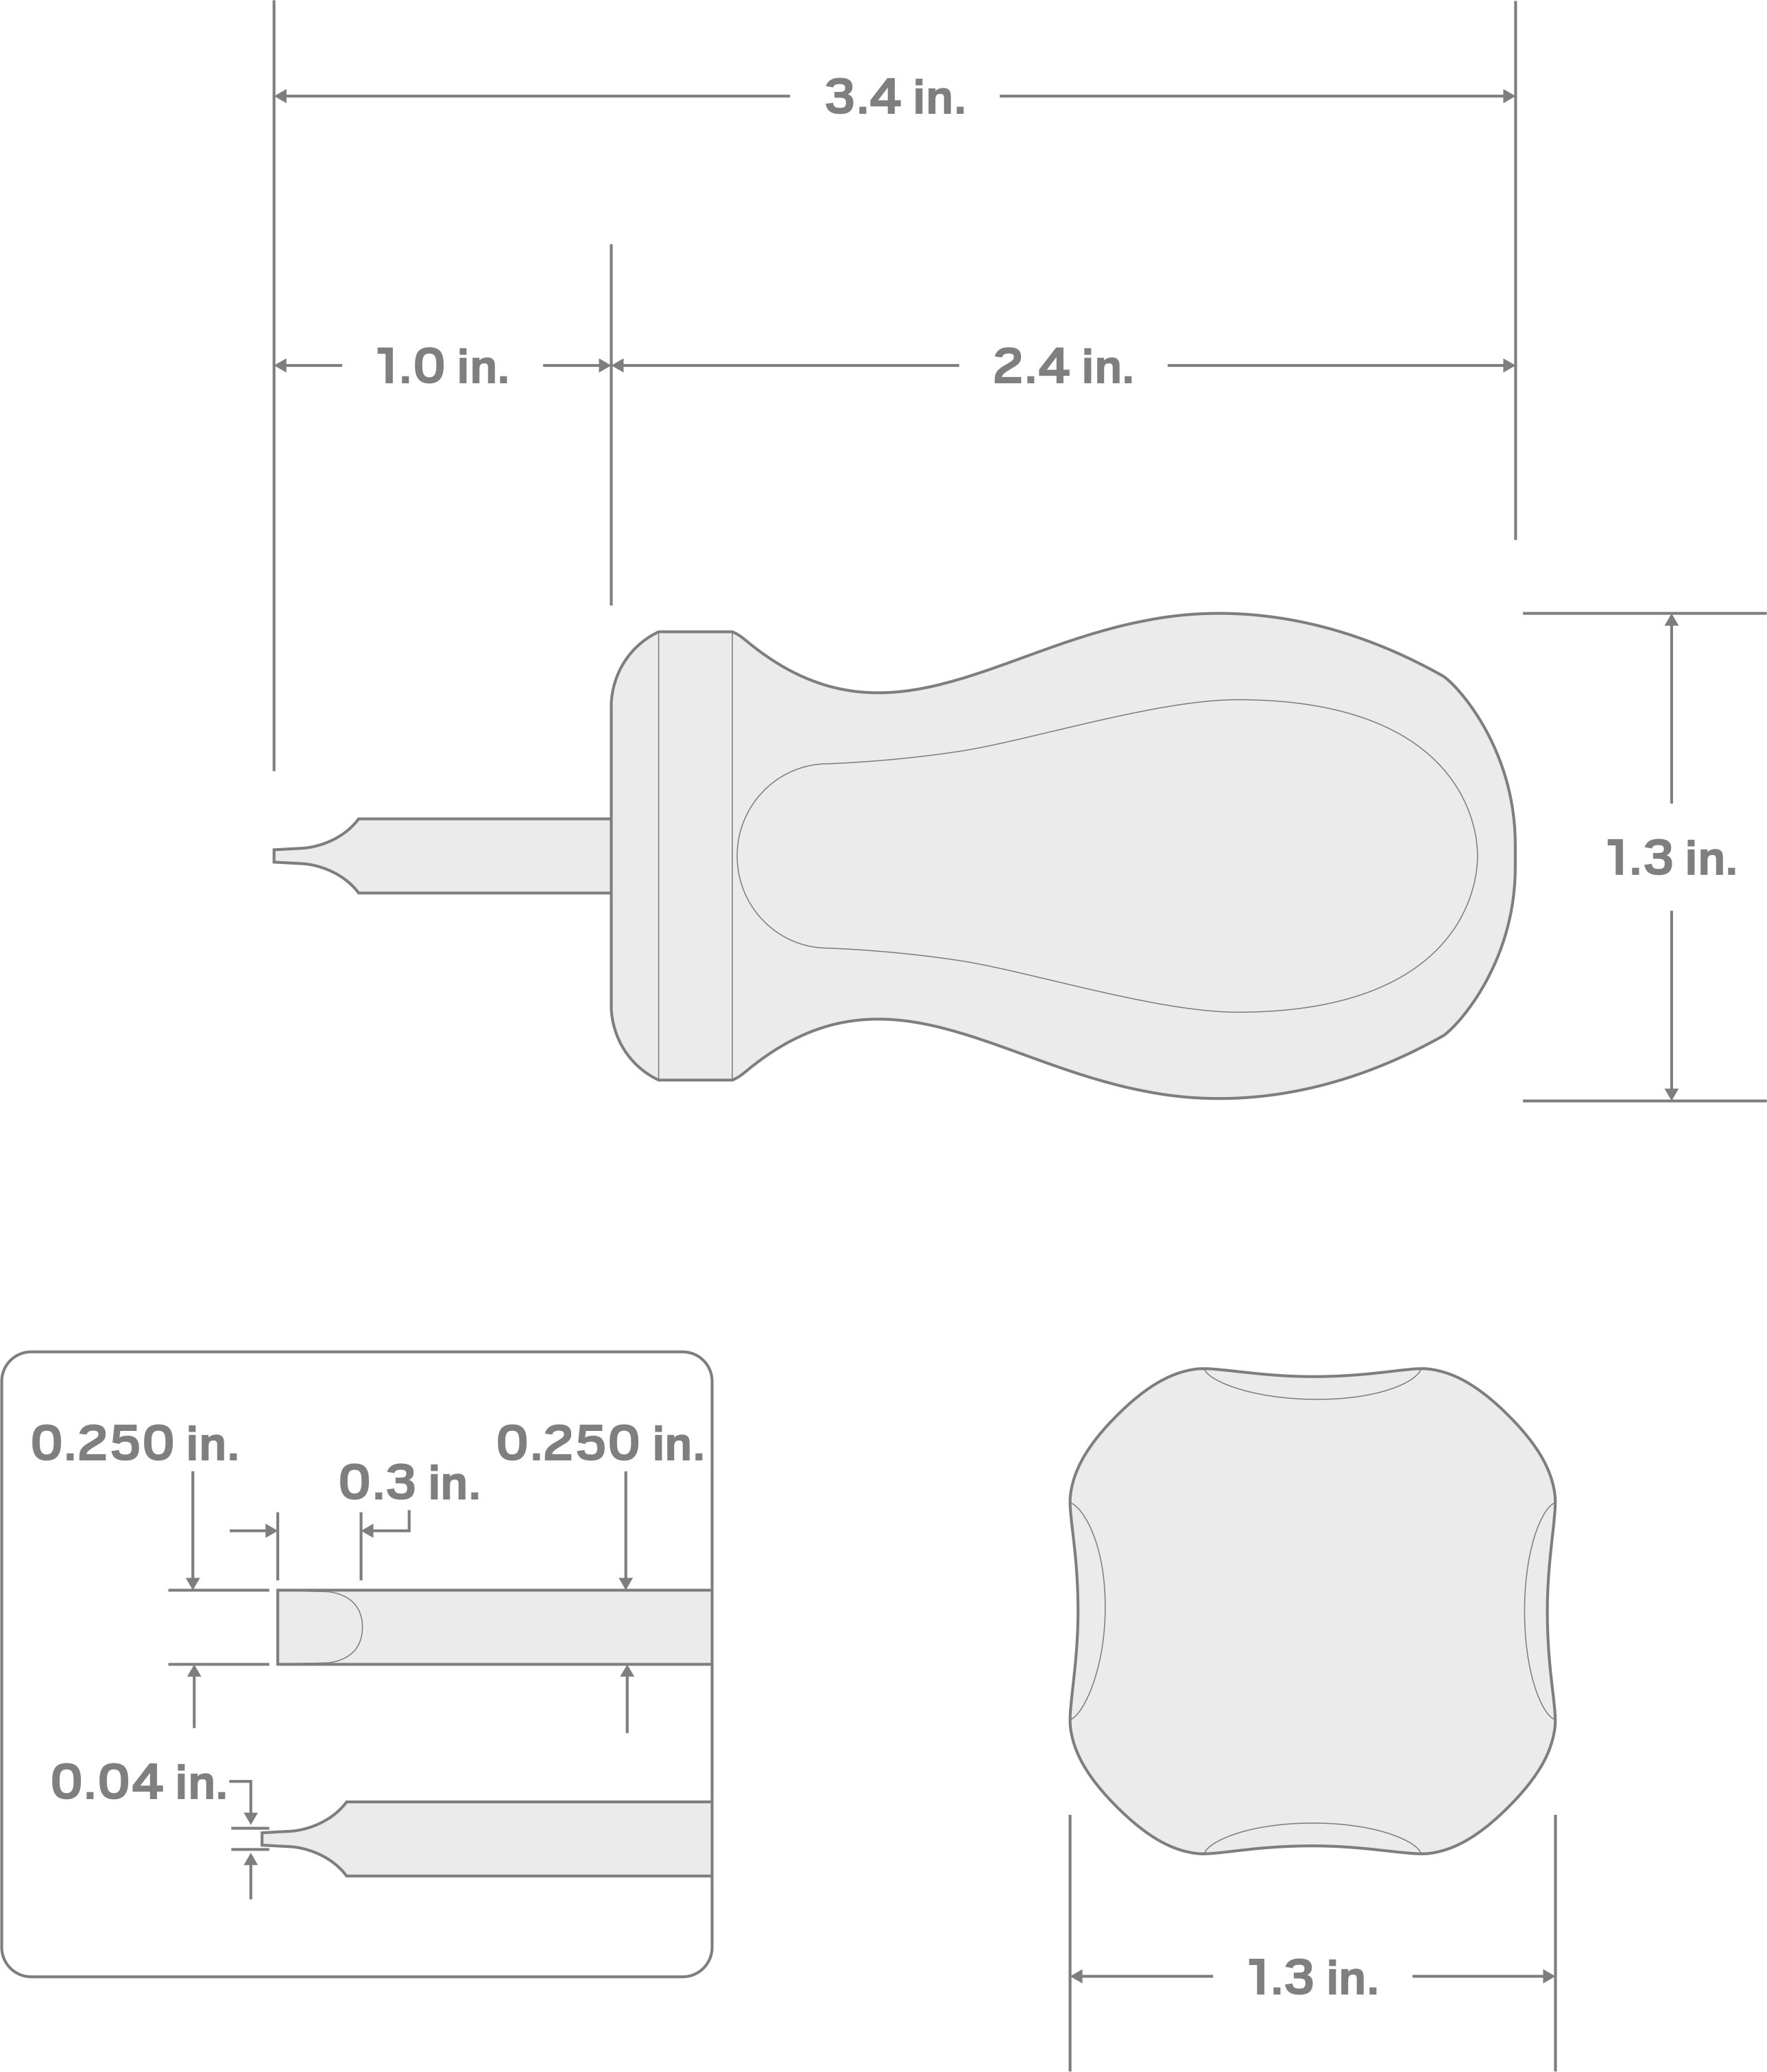 Specs for Stubby 1/4 Inch Slotted Hard Handle Screwdriver